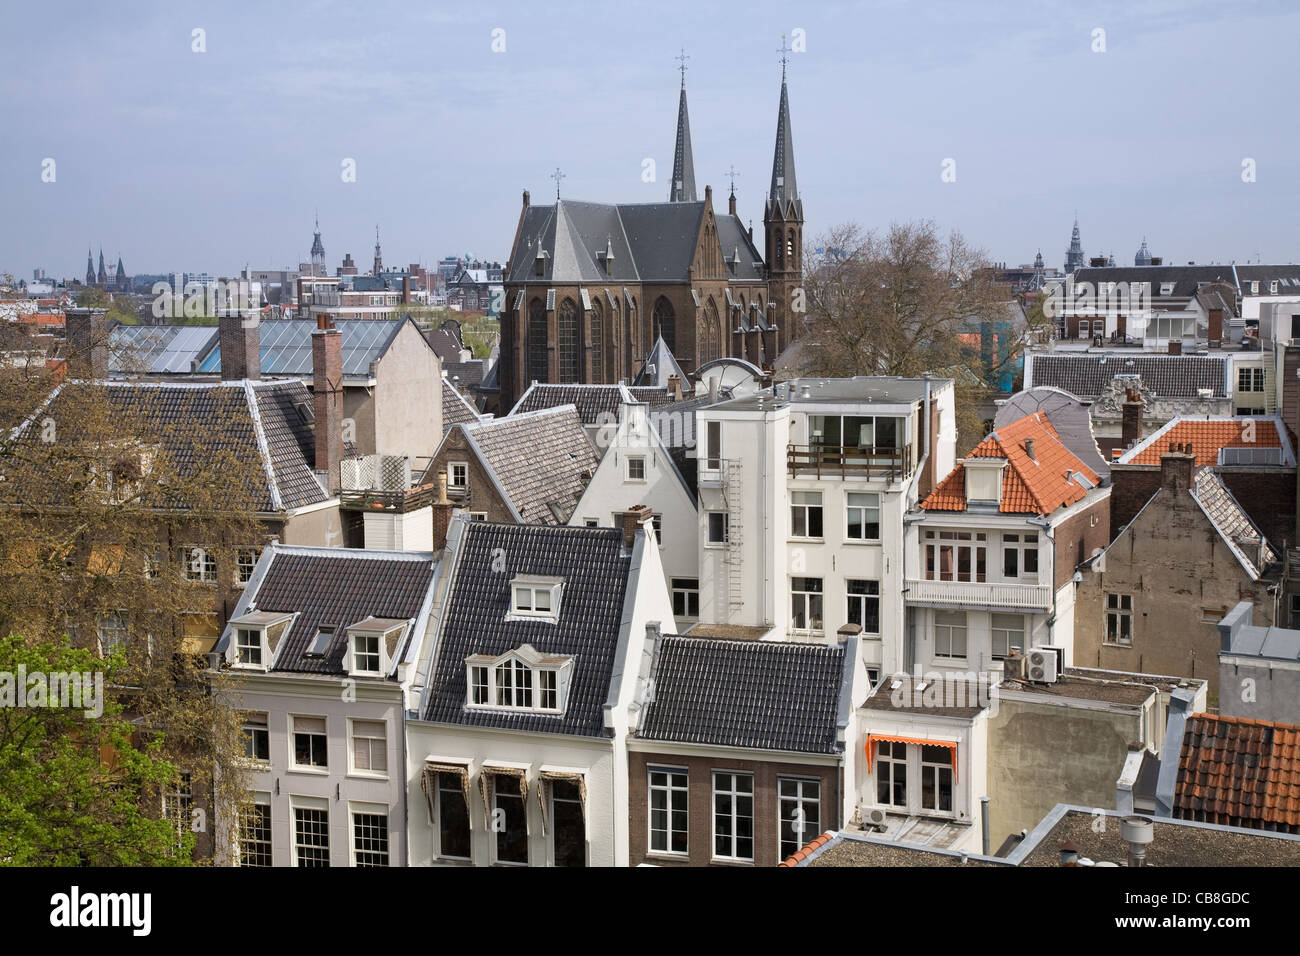 View of Rooftops Cafe of the De Krijtberg Roman Catholic church, Amsterdam, The Netherlands Stock Photo